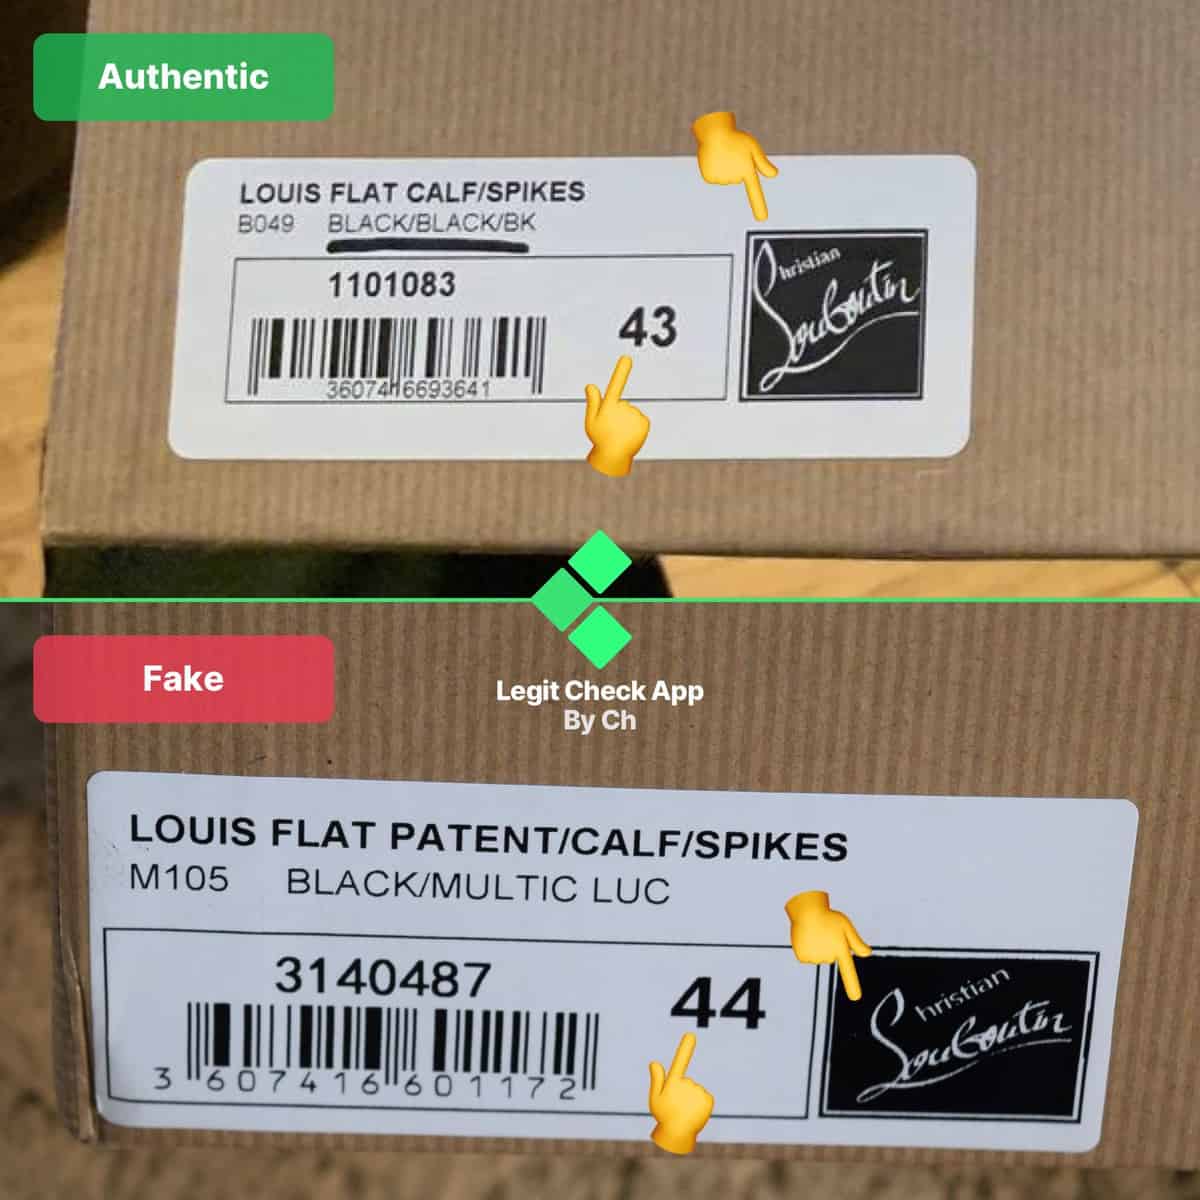 Reed Fashion Blog: CHRISTIAN LOUBOUTIN : AUTHENTICITY GUIDE